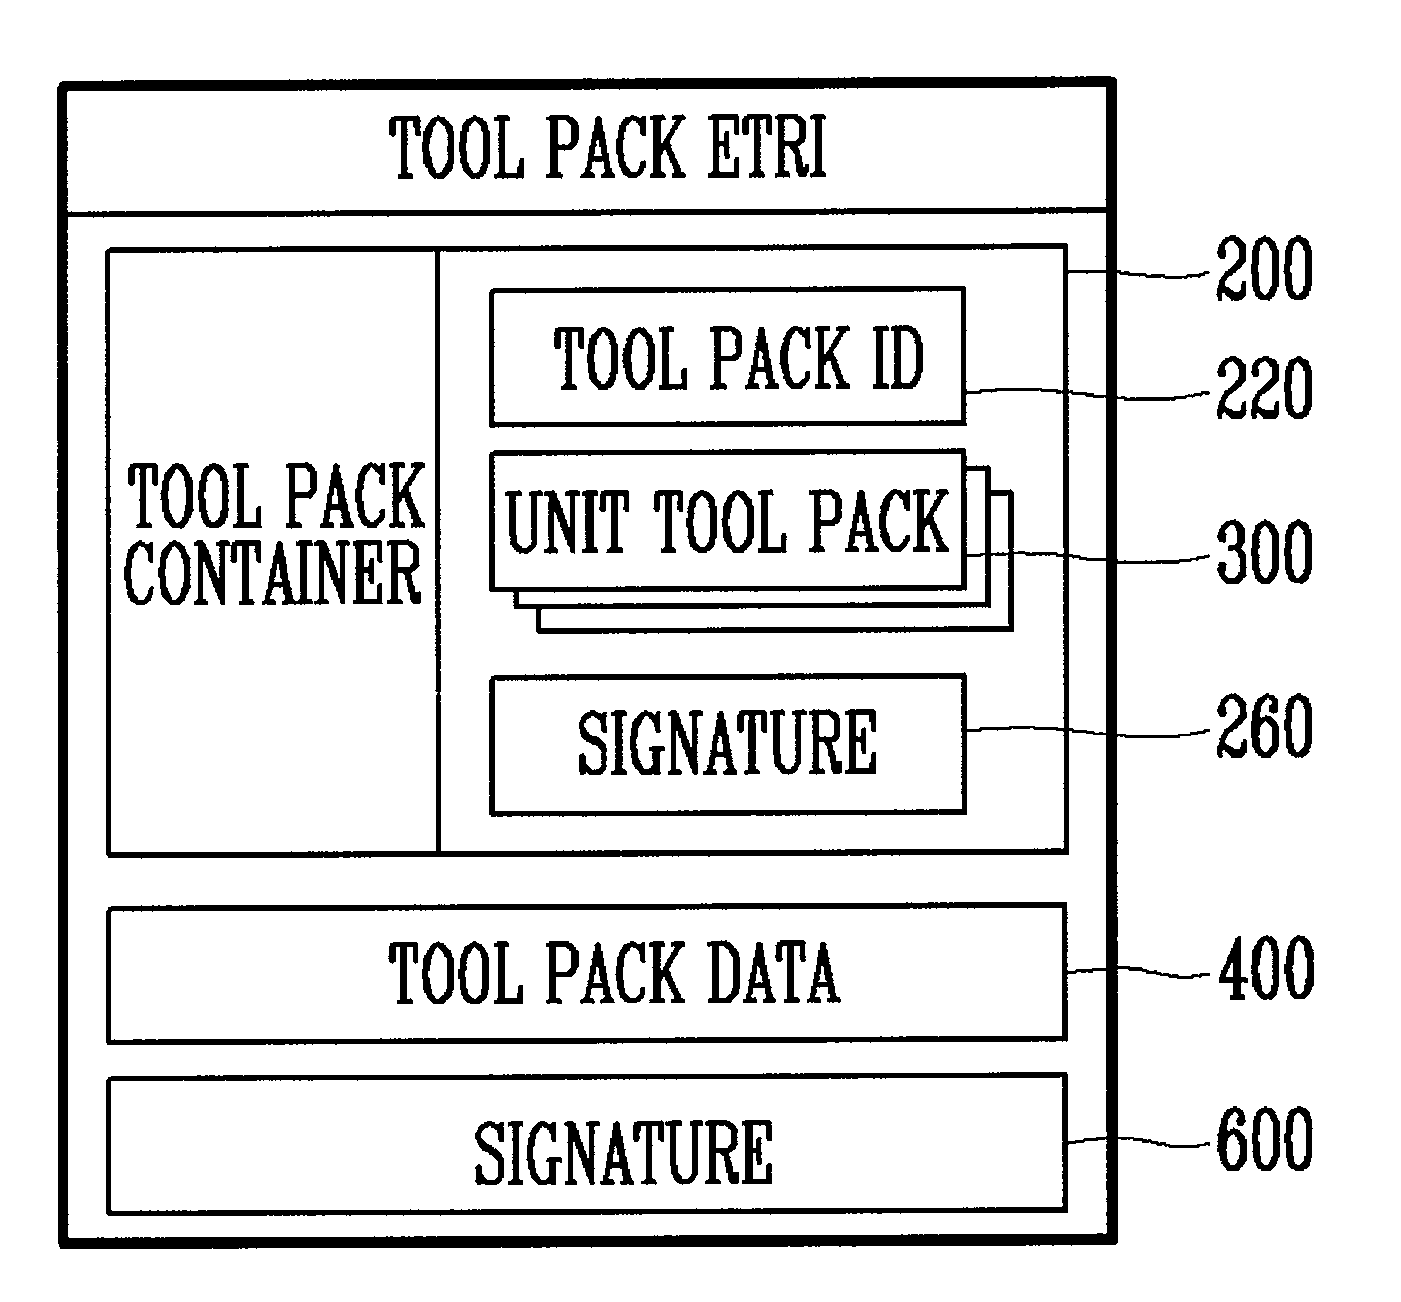 Tool pack structure and contents execution device